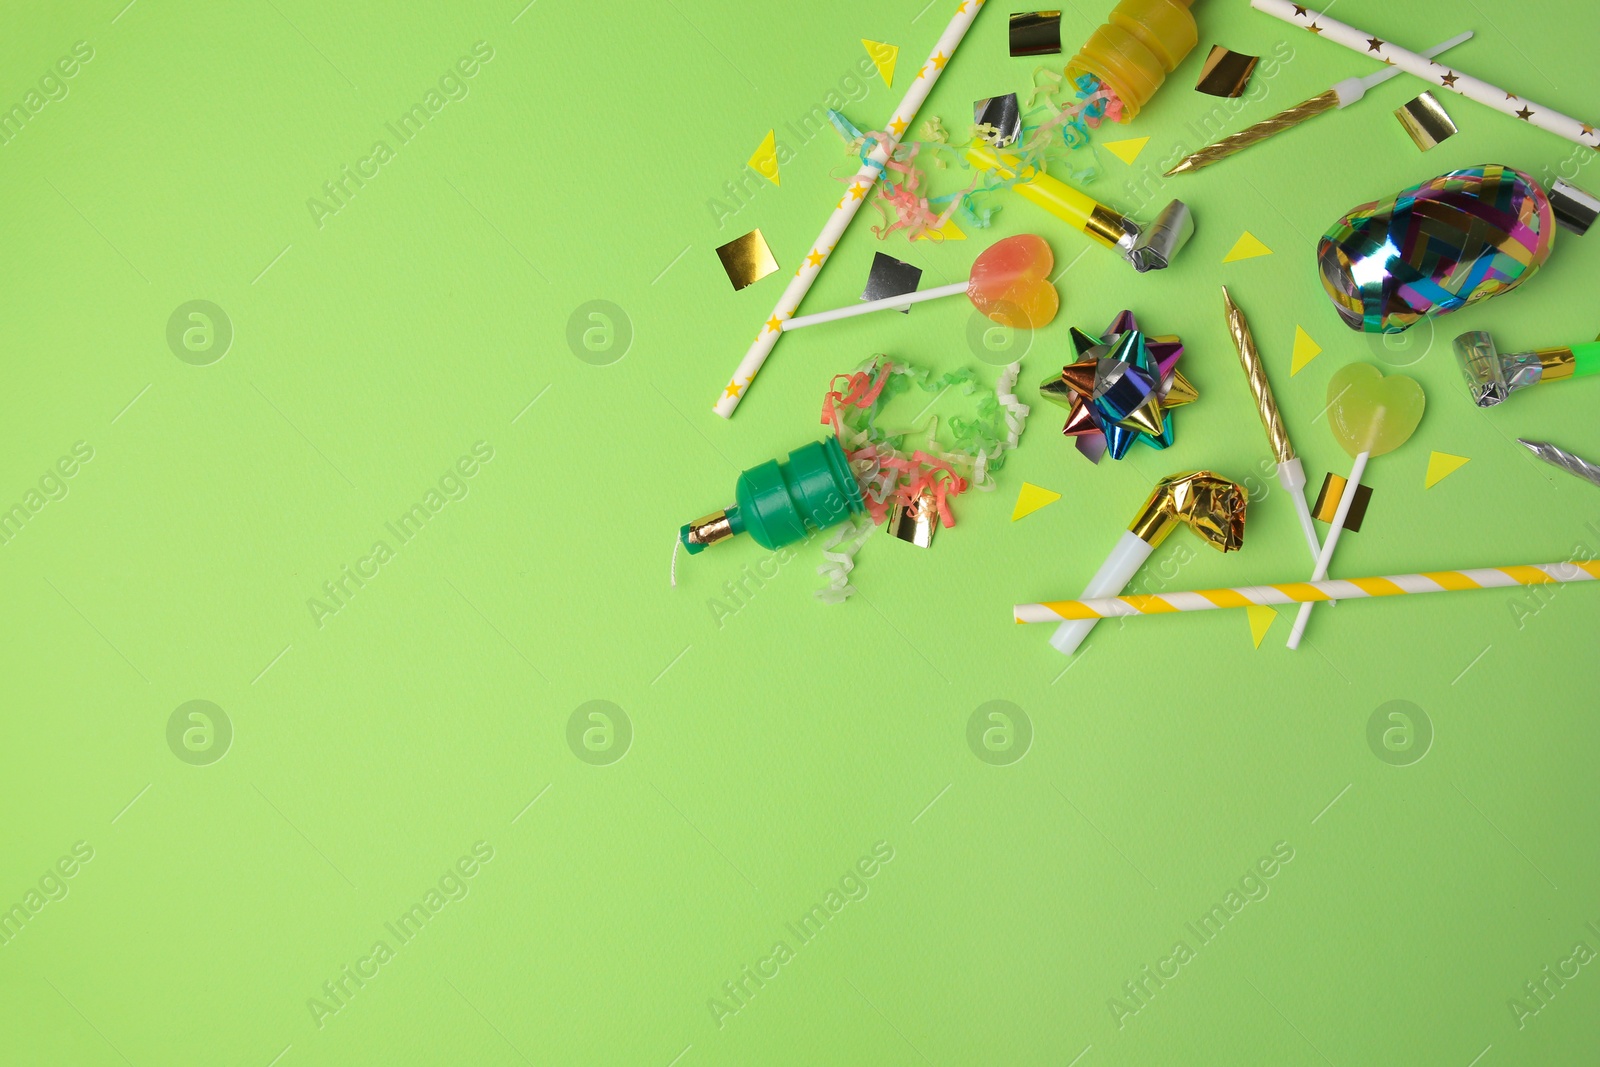 Photo of Party poppers with colorful streamers, blowers and festive decor on light green background, flat lay. Space for text